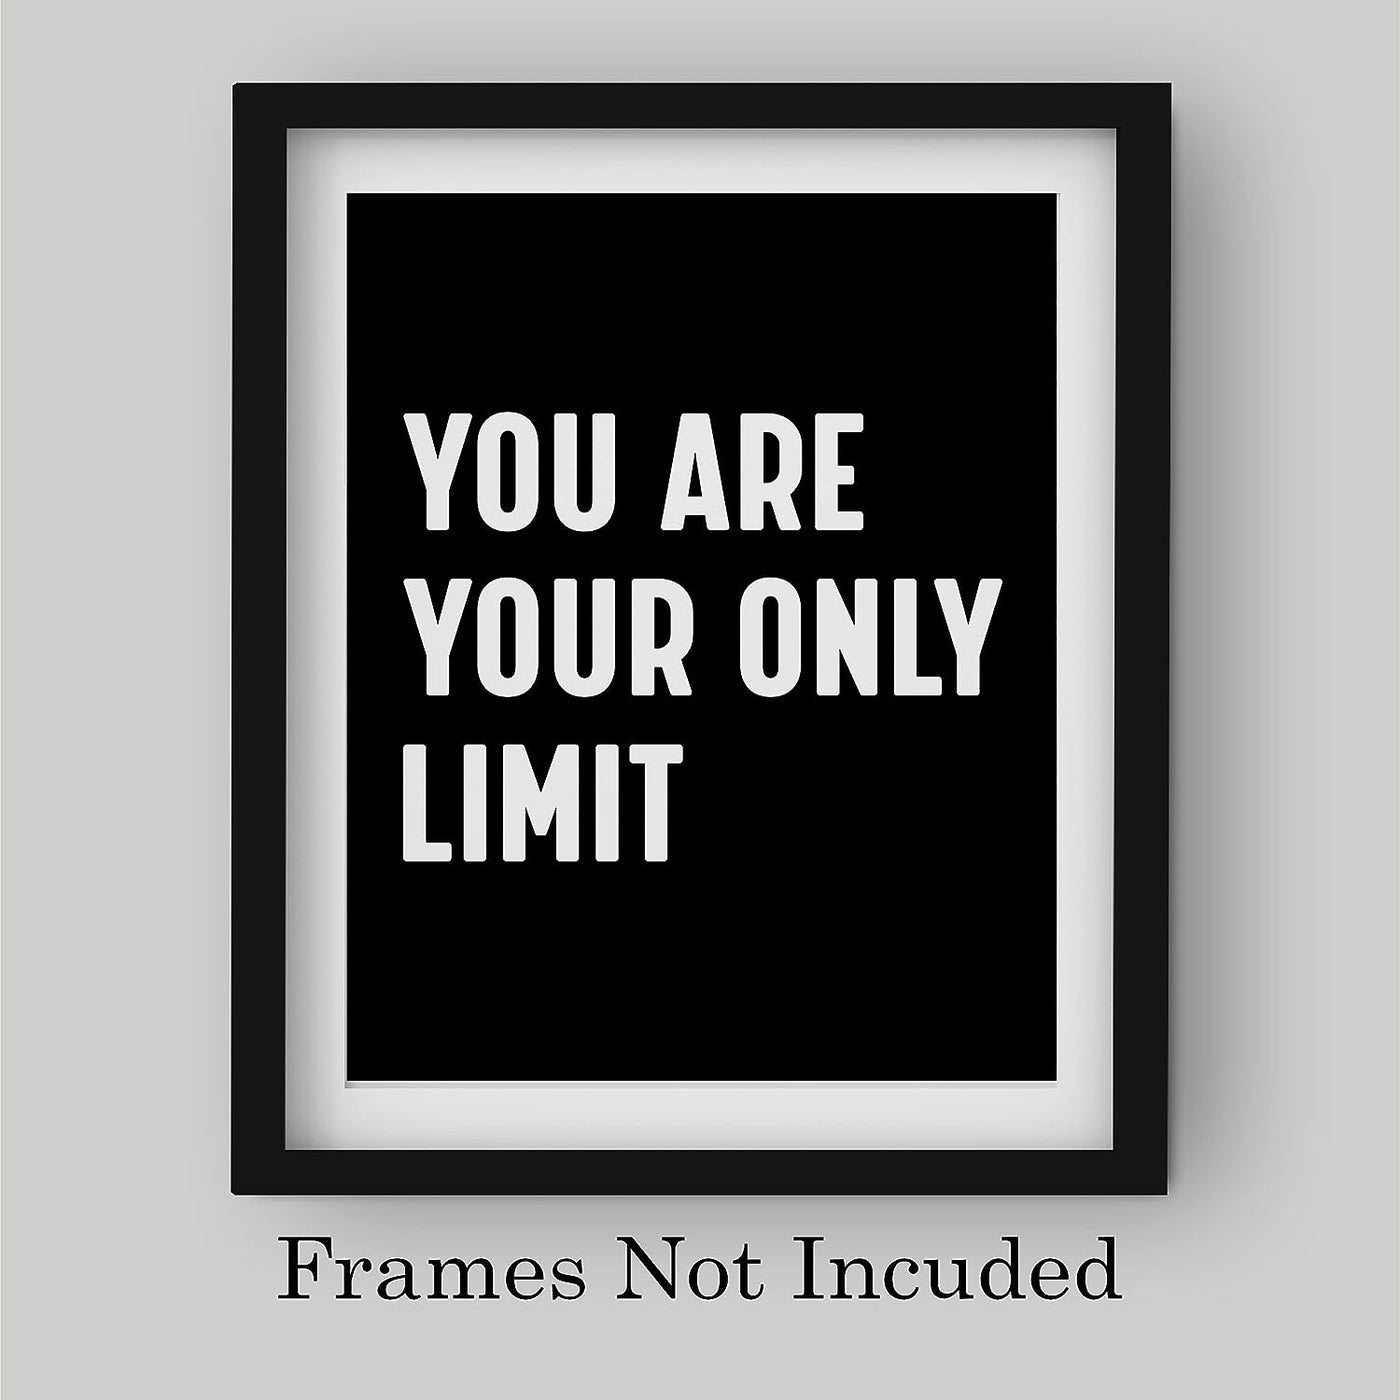 You Are Your Only Limit Motivational Quotes Wall Sign-8 x 10" Inspirational Typographic Art Print-Ready to Frame. Modern Decoration for Home-Office-Desk-School-Dorm Decor. Great Gift of Motivation!